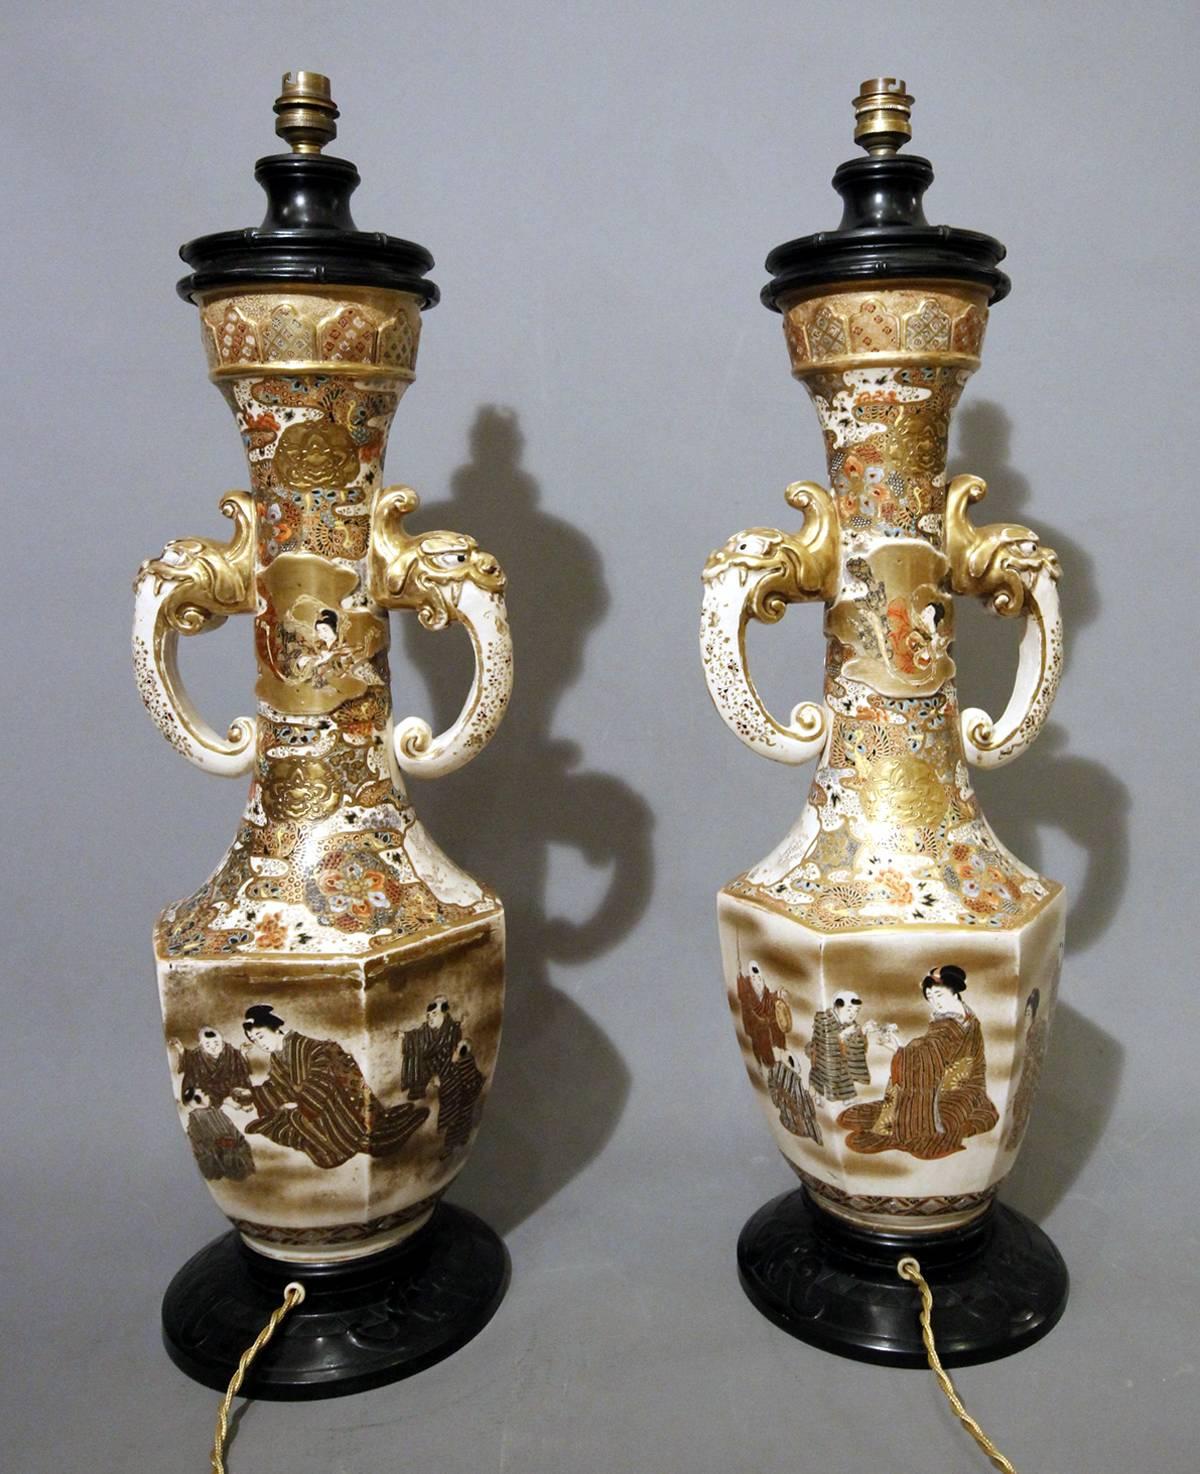 Nice pair of Satsuma lamps with black patinated bronze mount.
Gilding is somewhat mitigated locally but they are in very good condition, with no cracks or breakages. Electrical wiring redone.